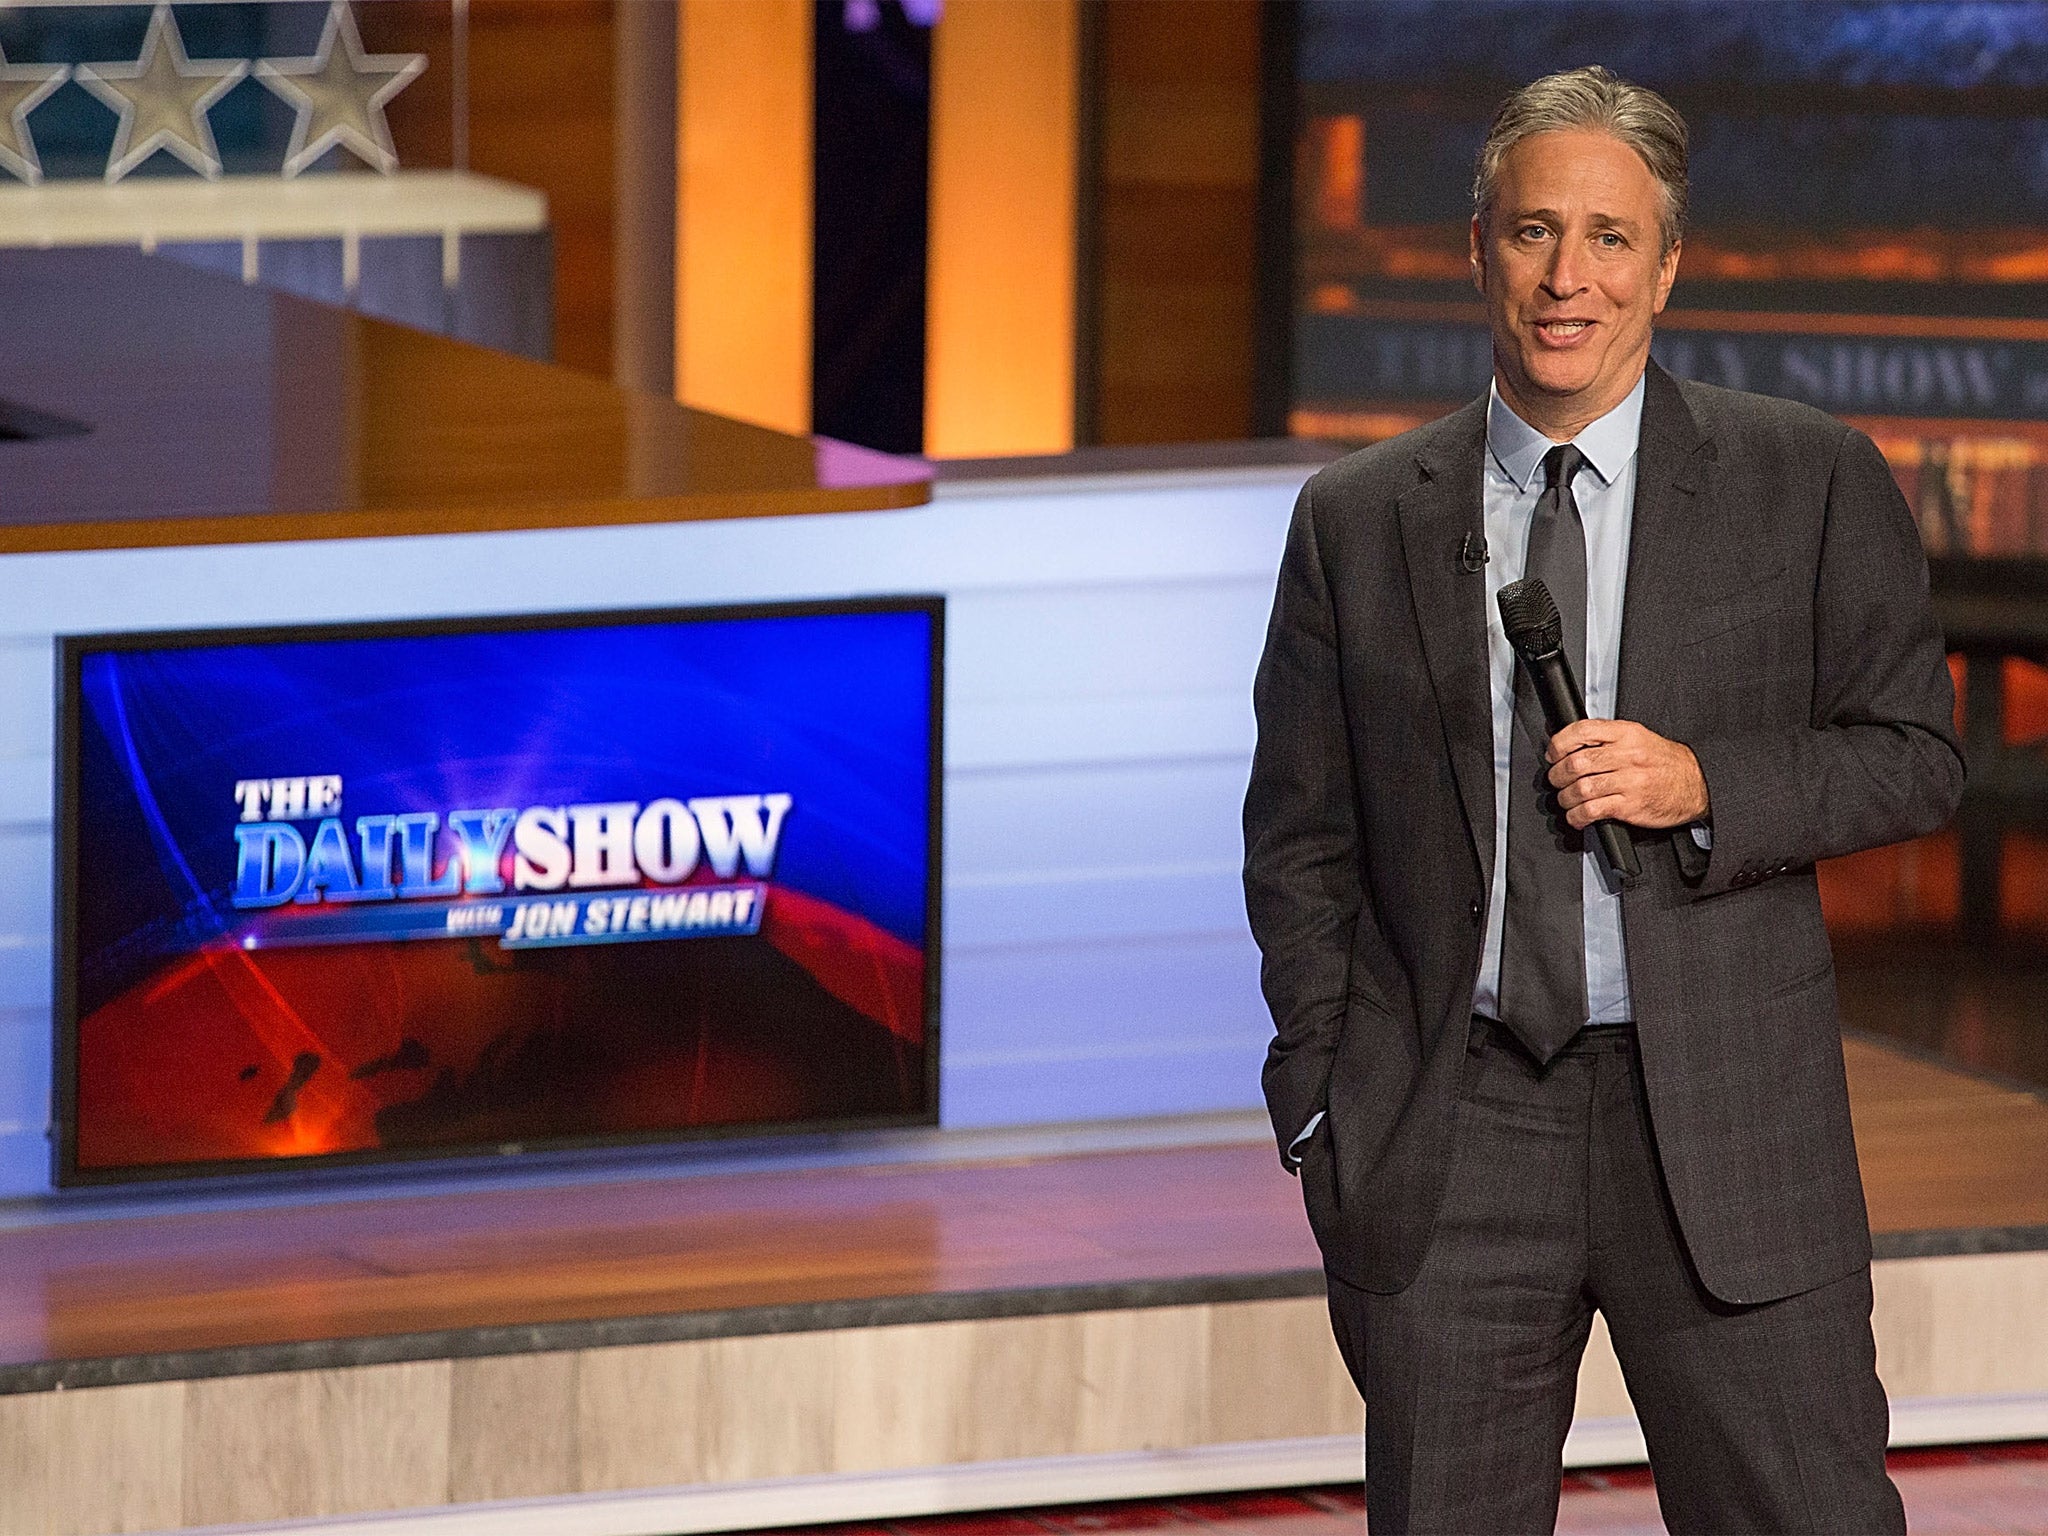 Jon Stewart took his place behind the Daily Show desk in 1999